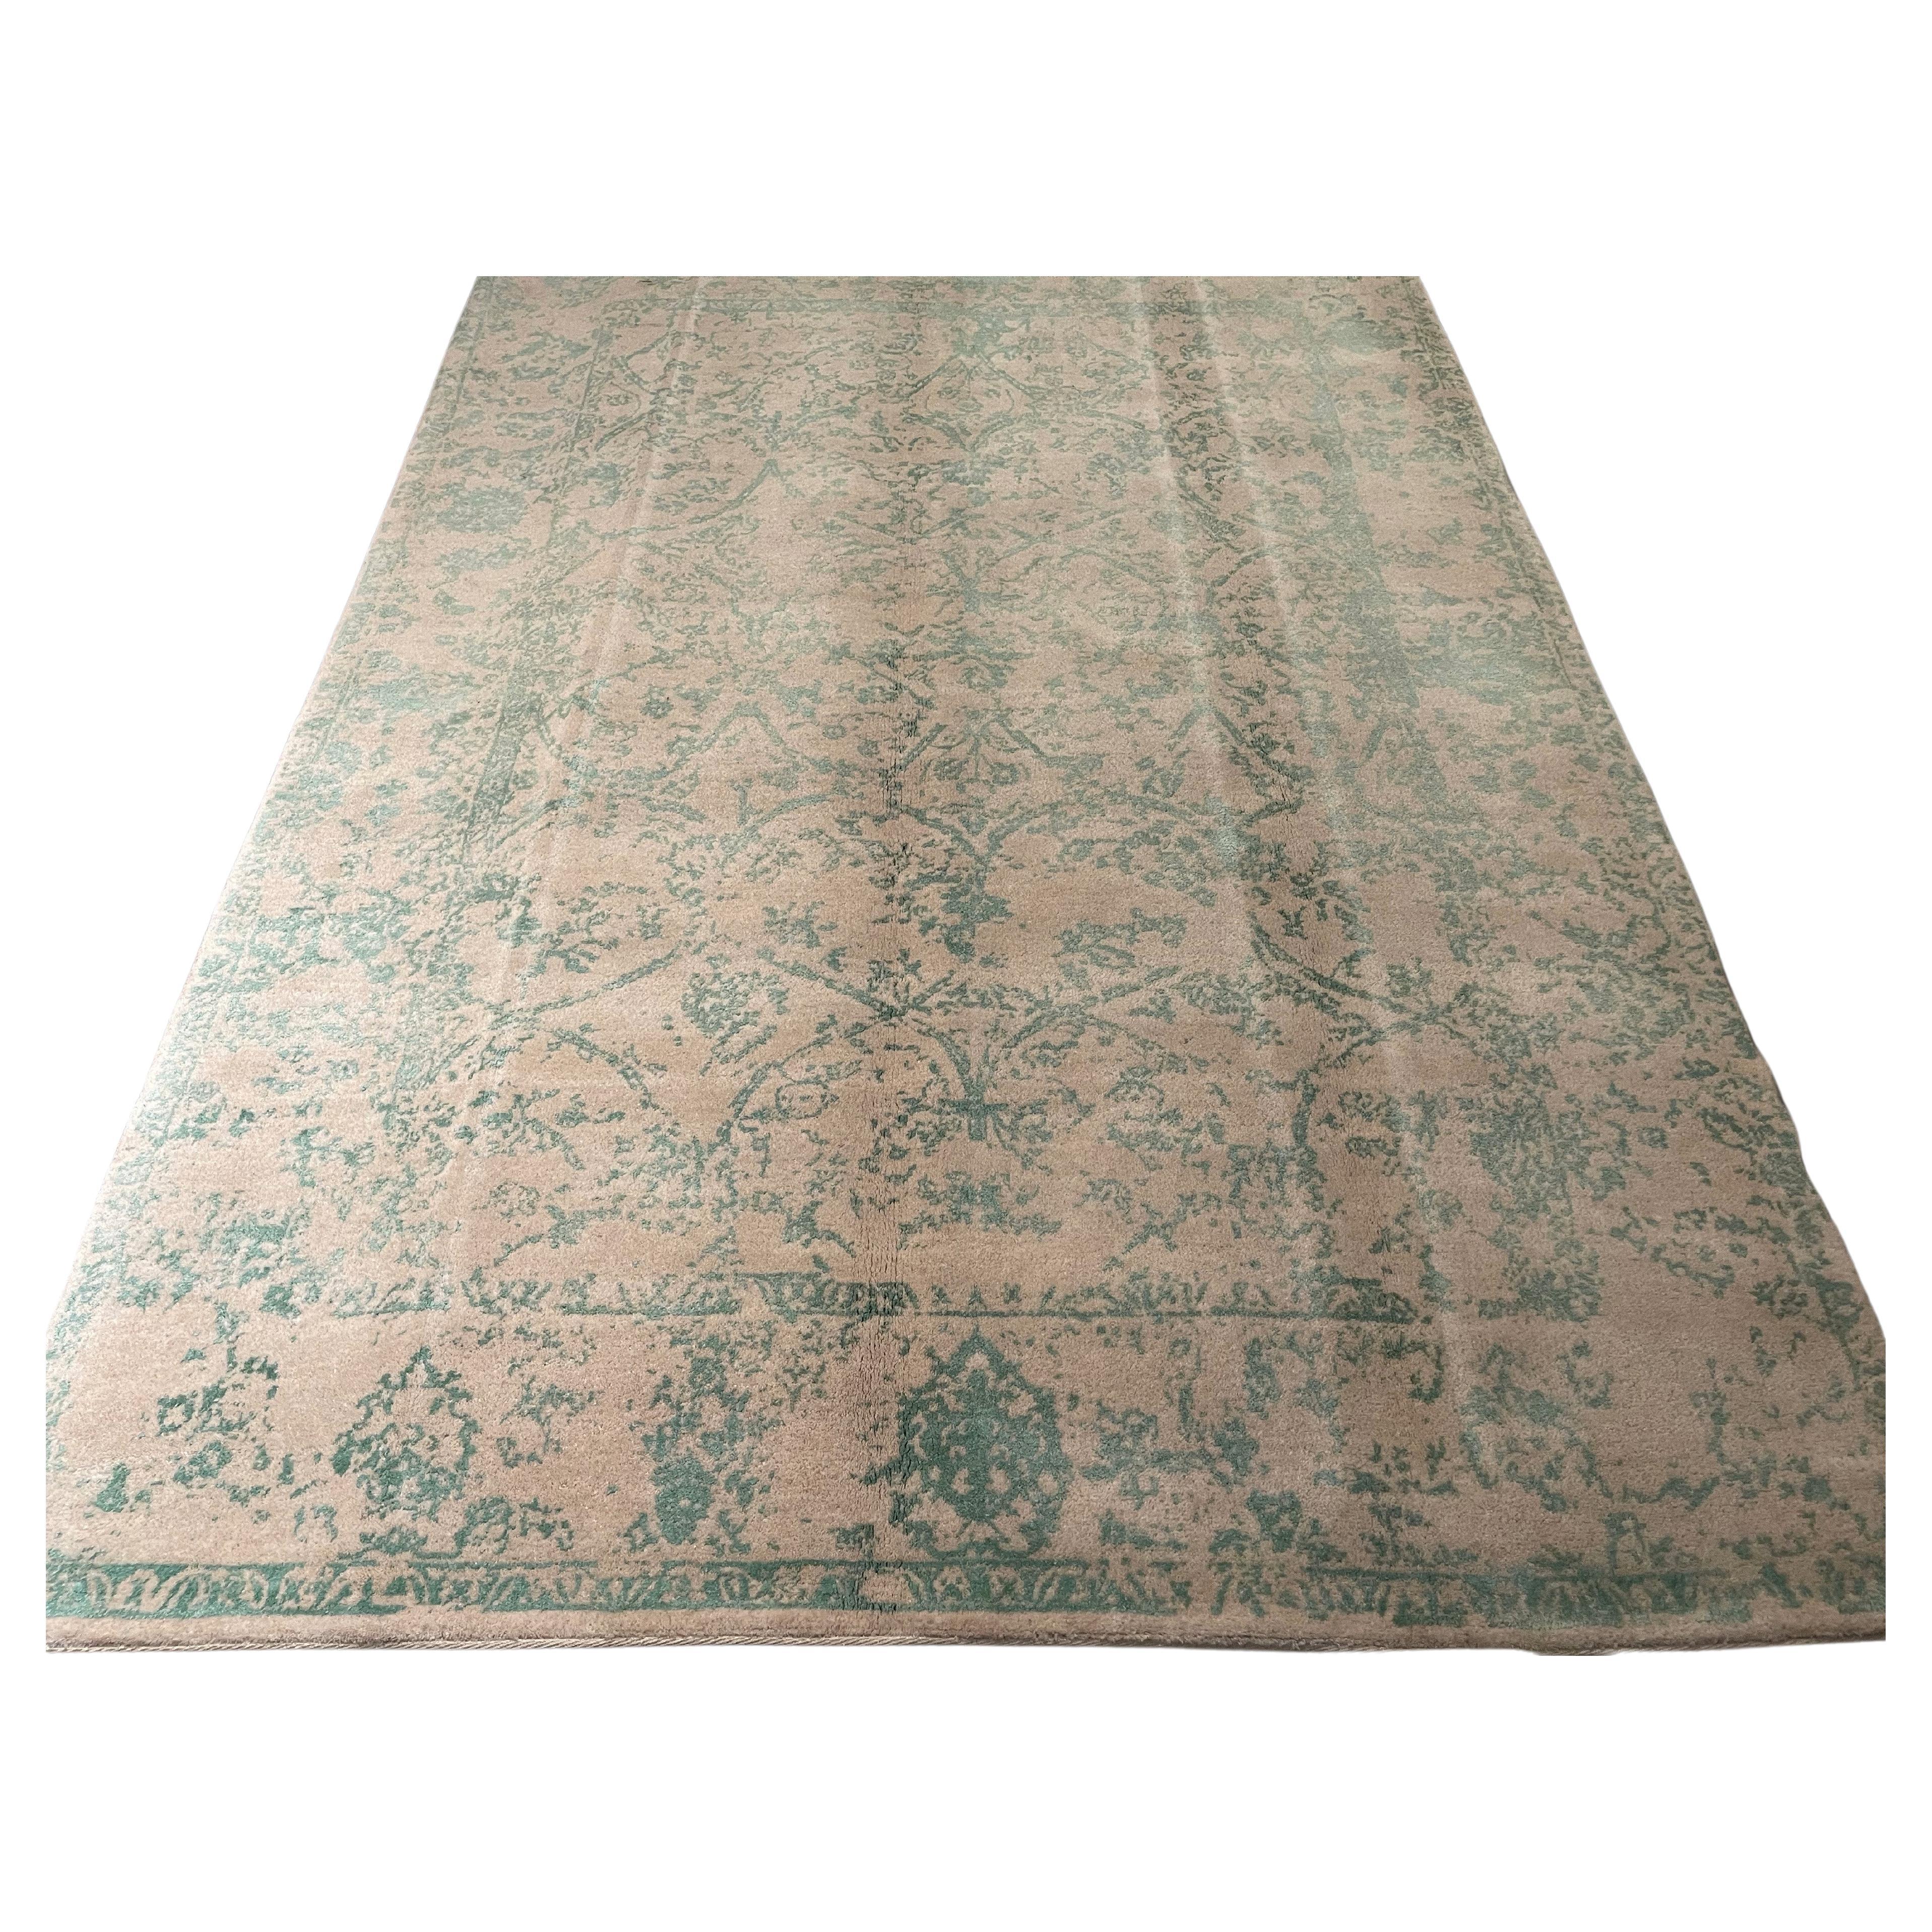 Baroque Revival Indian Rugs